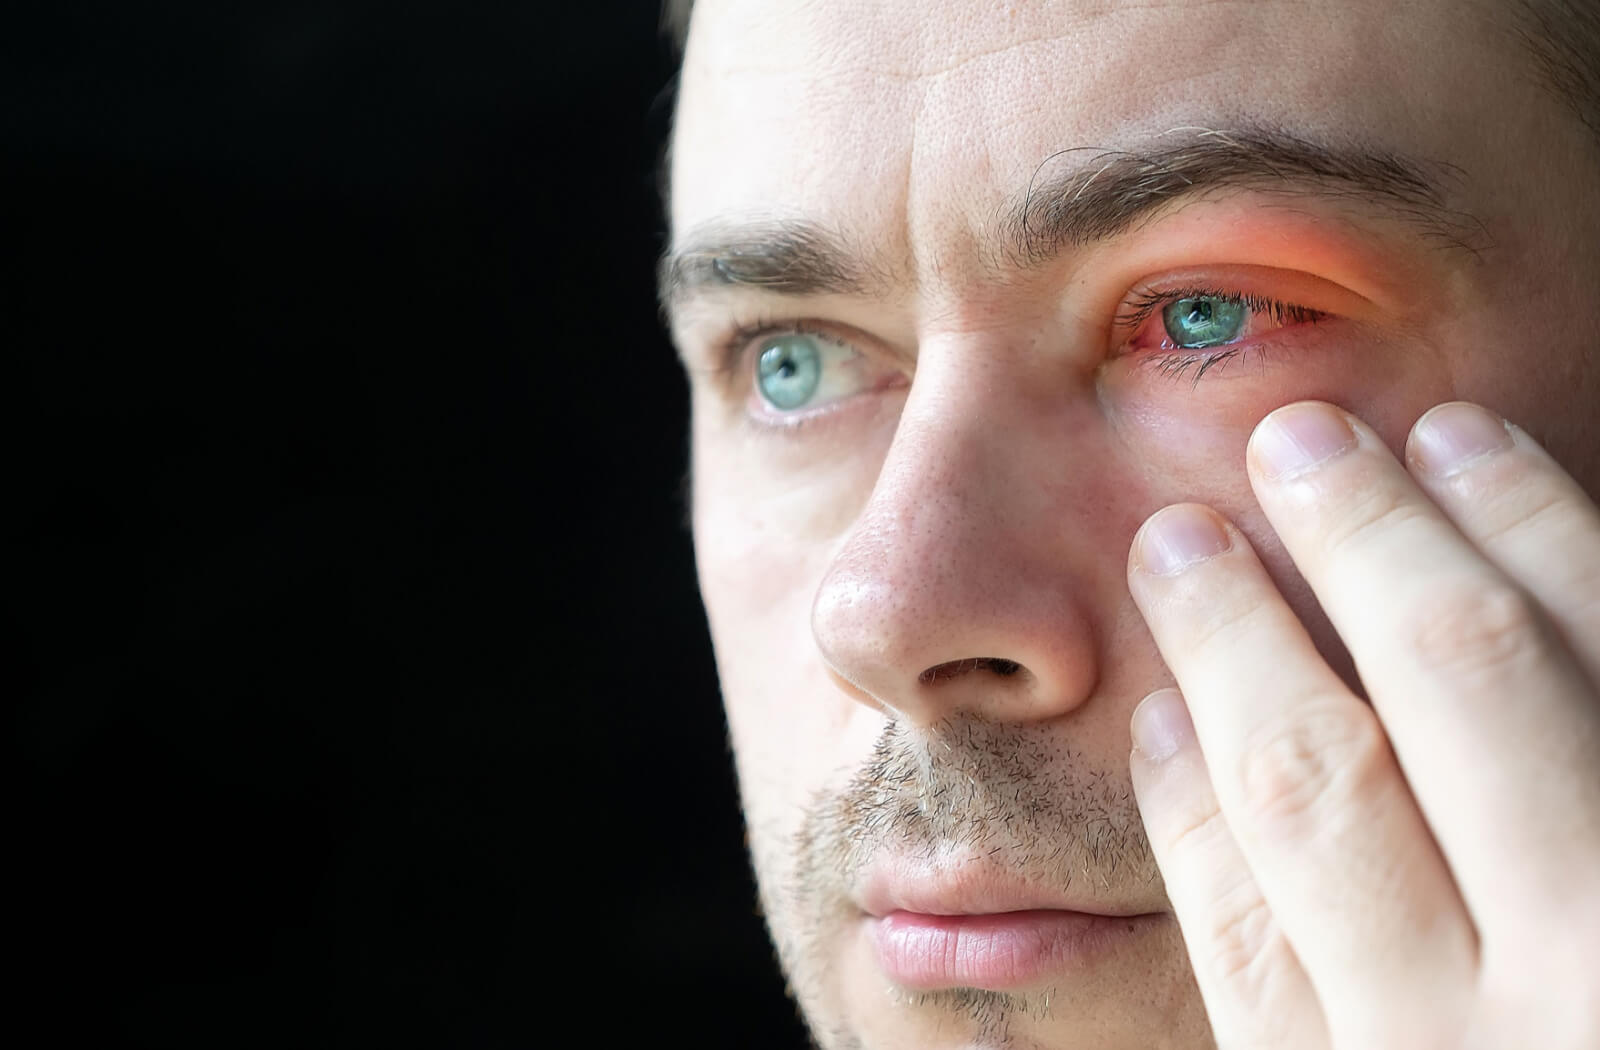 A close-up of a man touching his severely bloodshot eye,  itchy, swollen, and redness on the lining of the eyelids are common symptoms of Blepharitis. BlephEx is one treatment option that can relieve symptoms by removing the blockages that lead to dry eyes for longer-lasting relief.